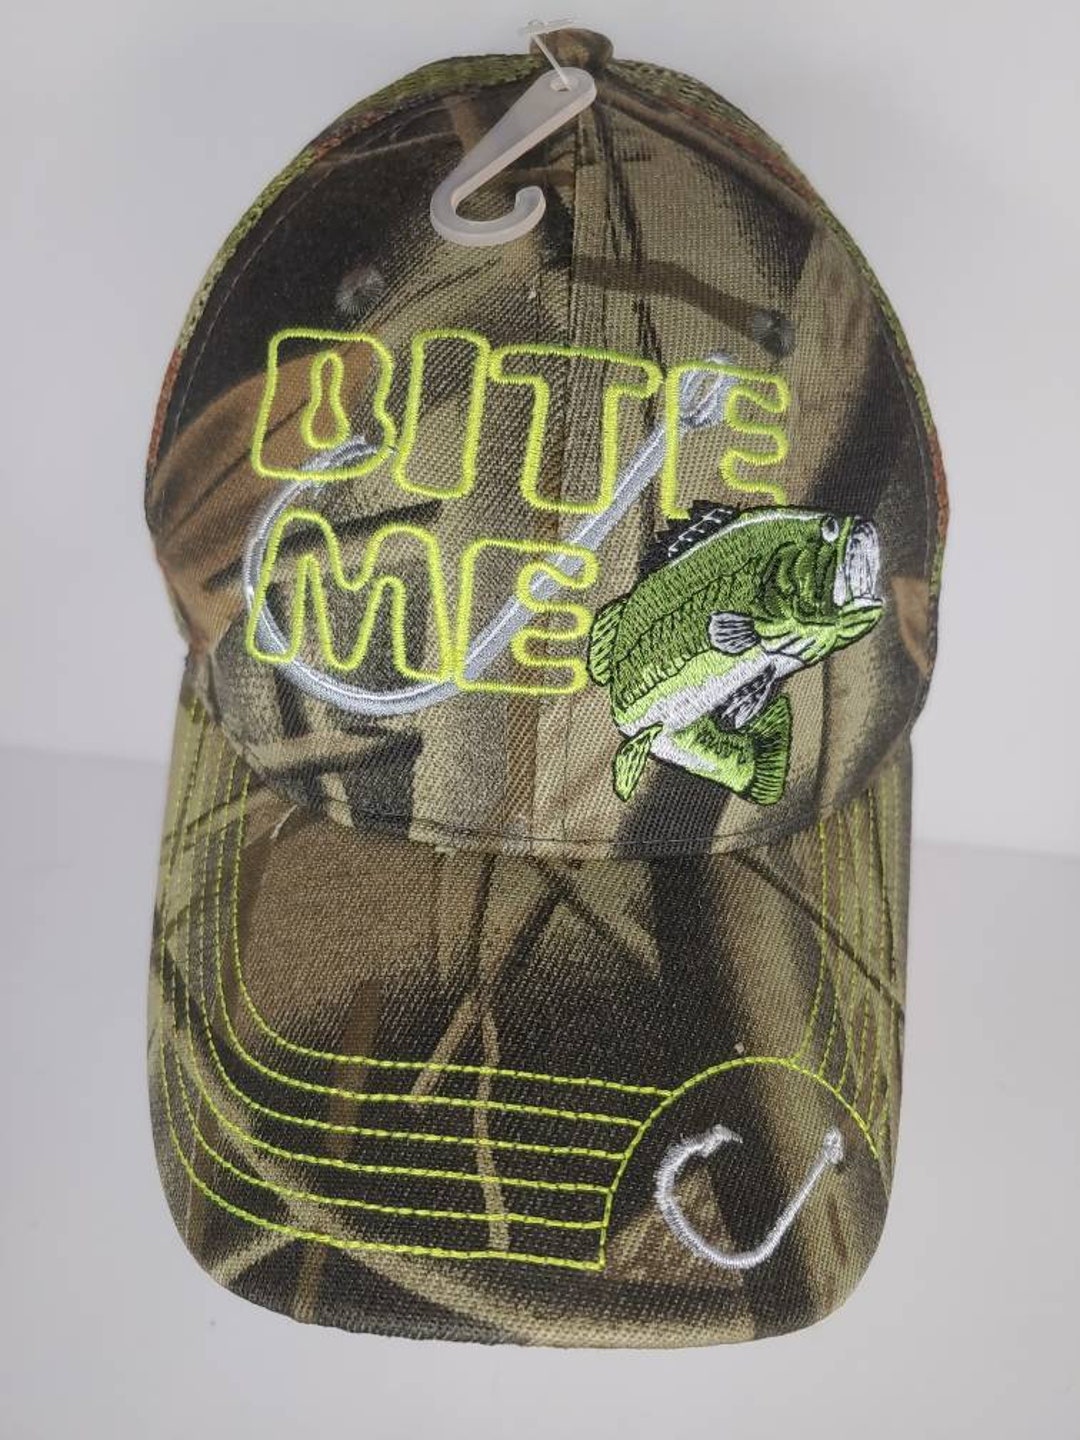 Bite Me bass W/hook and Fish Black and Camouflage Bill, Baseball